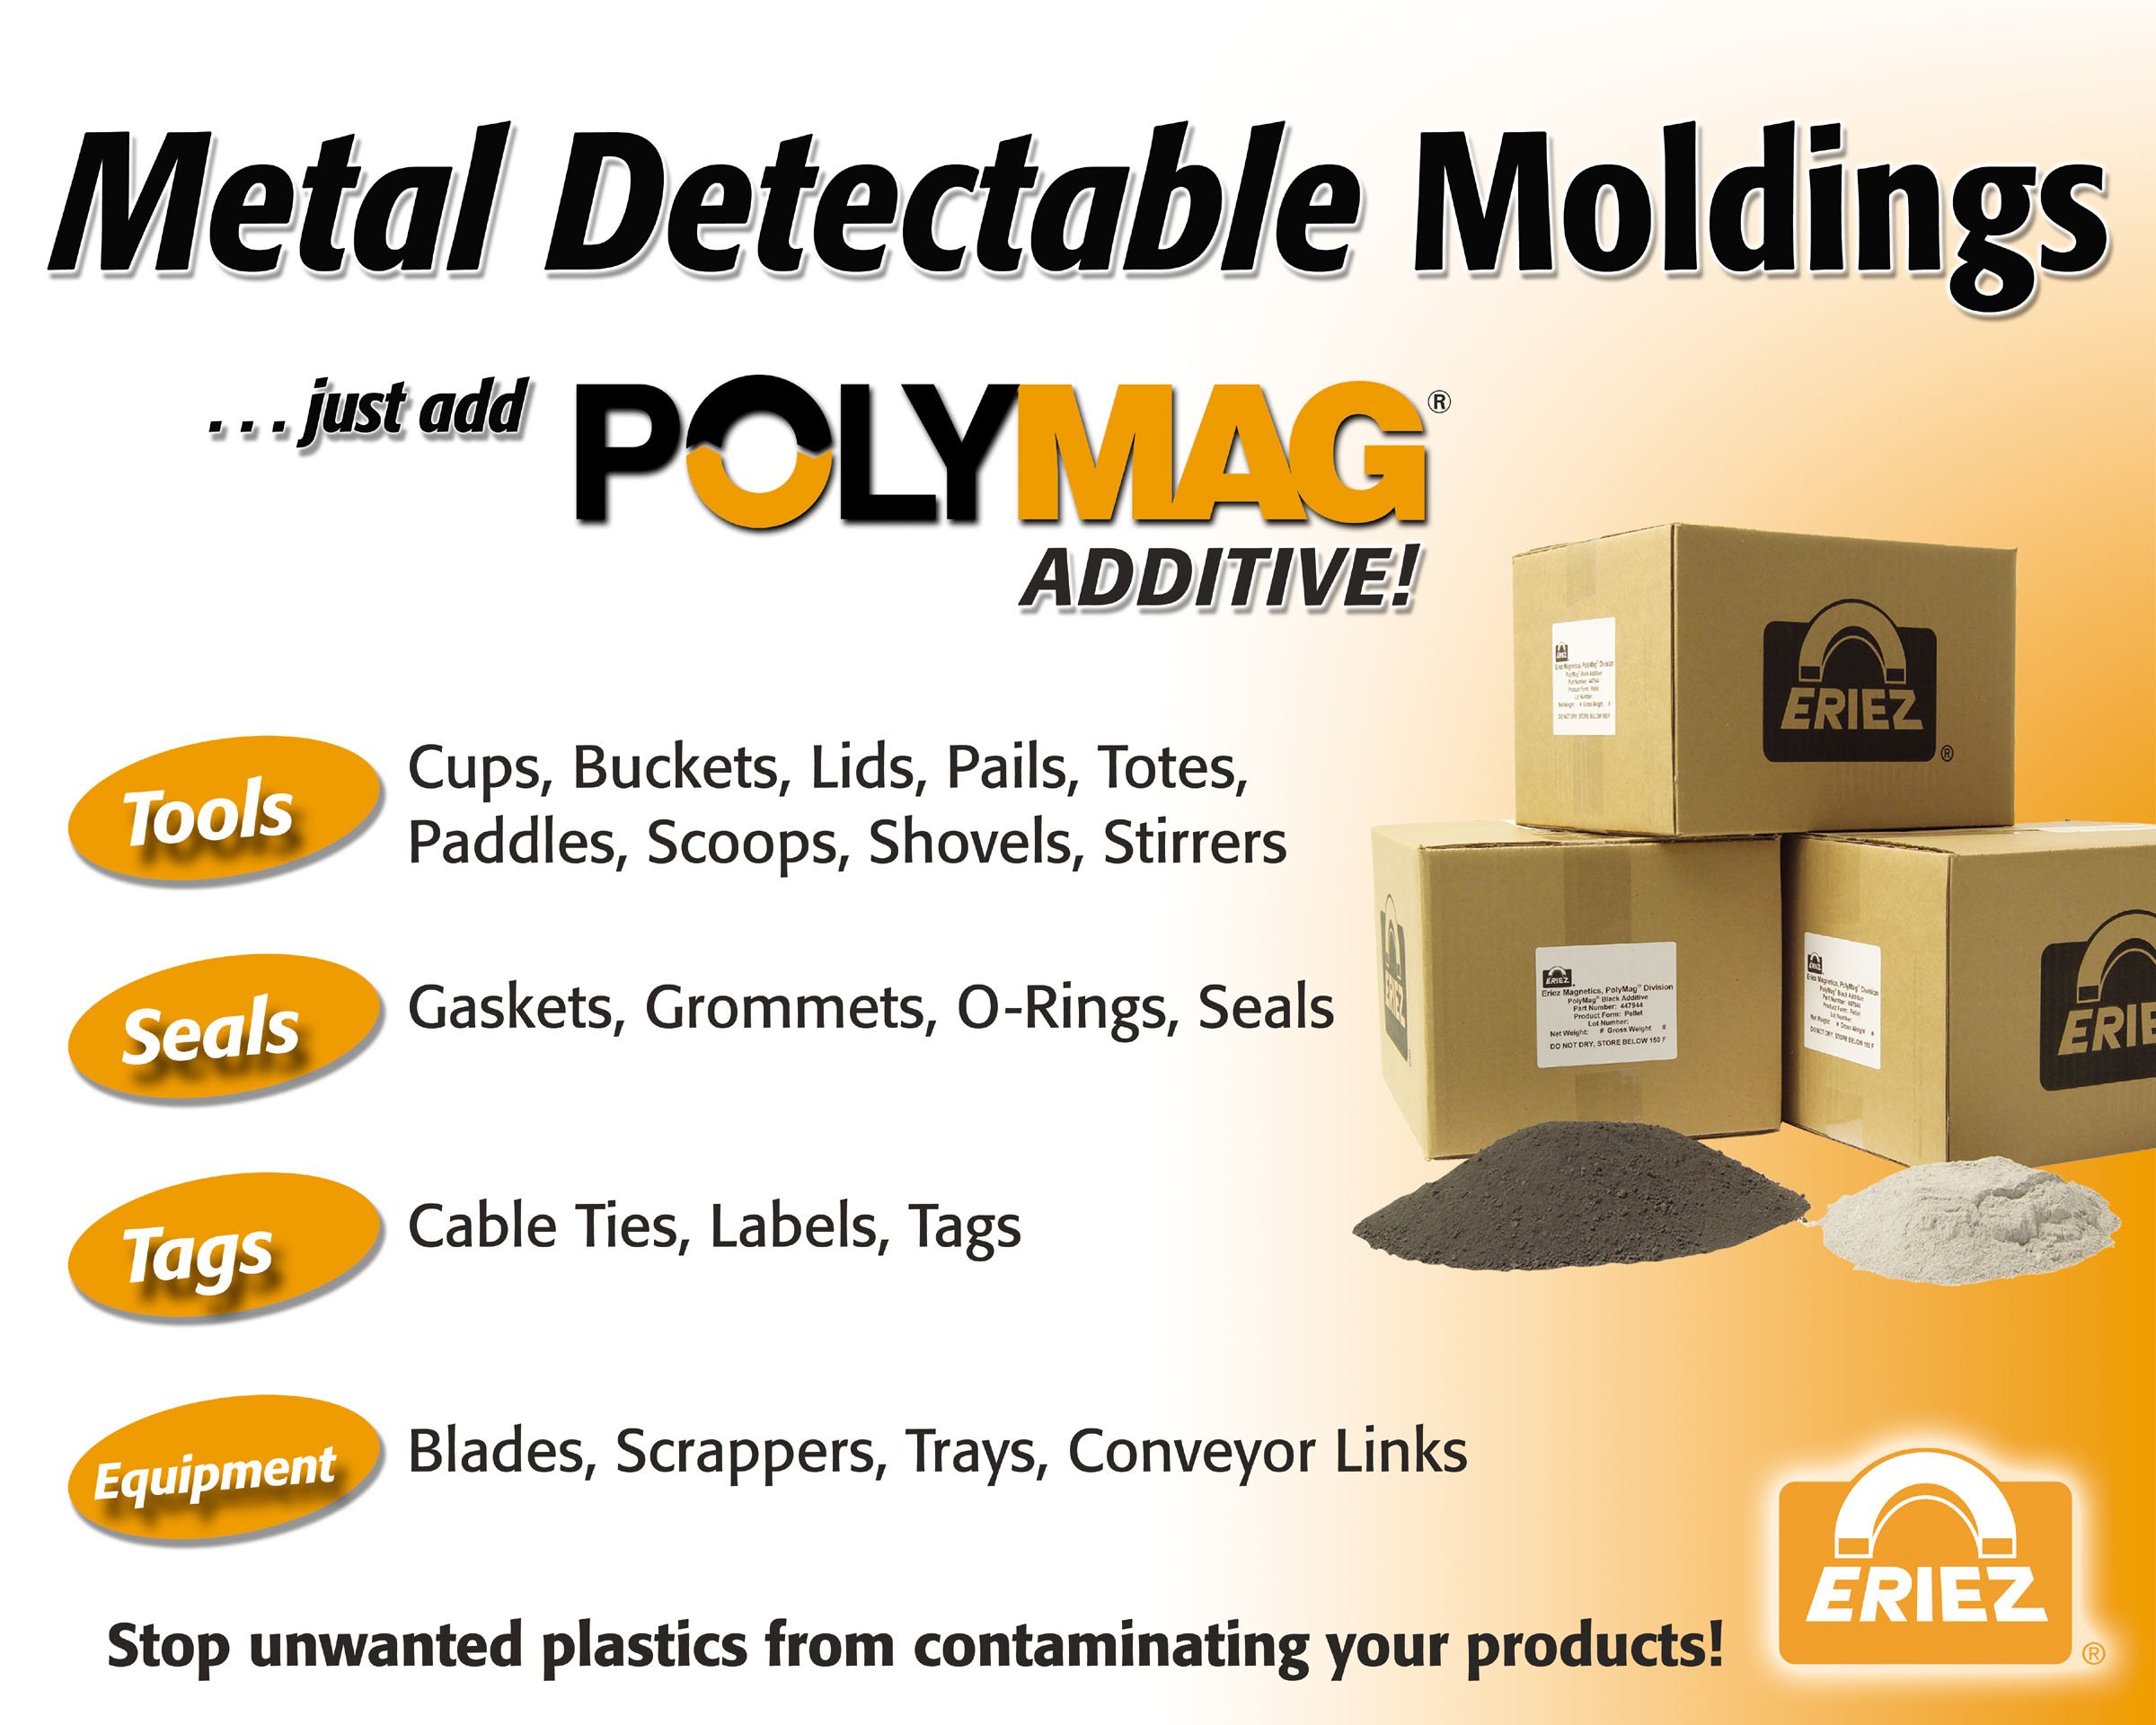 PolyMag® Metal & X-Ray Detectable Additive